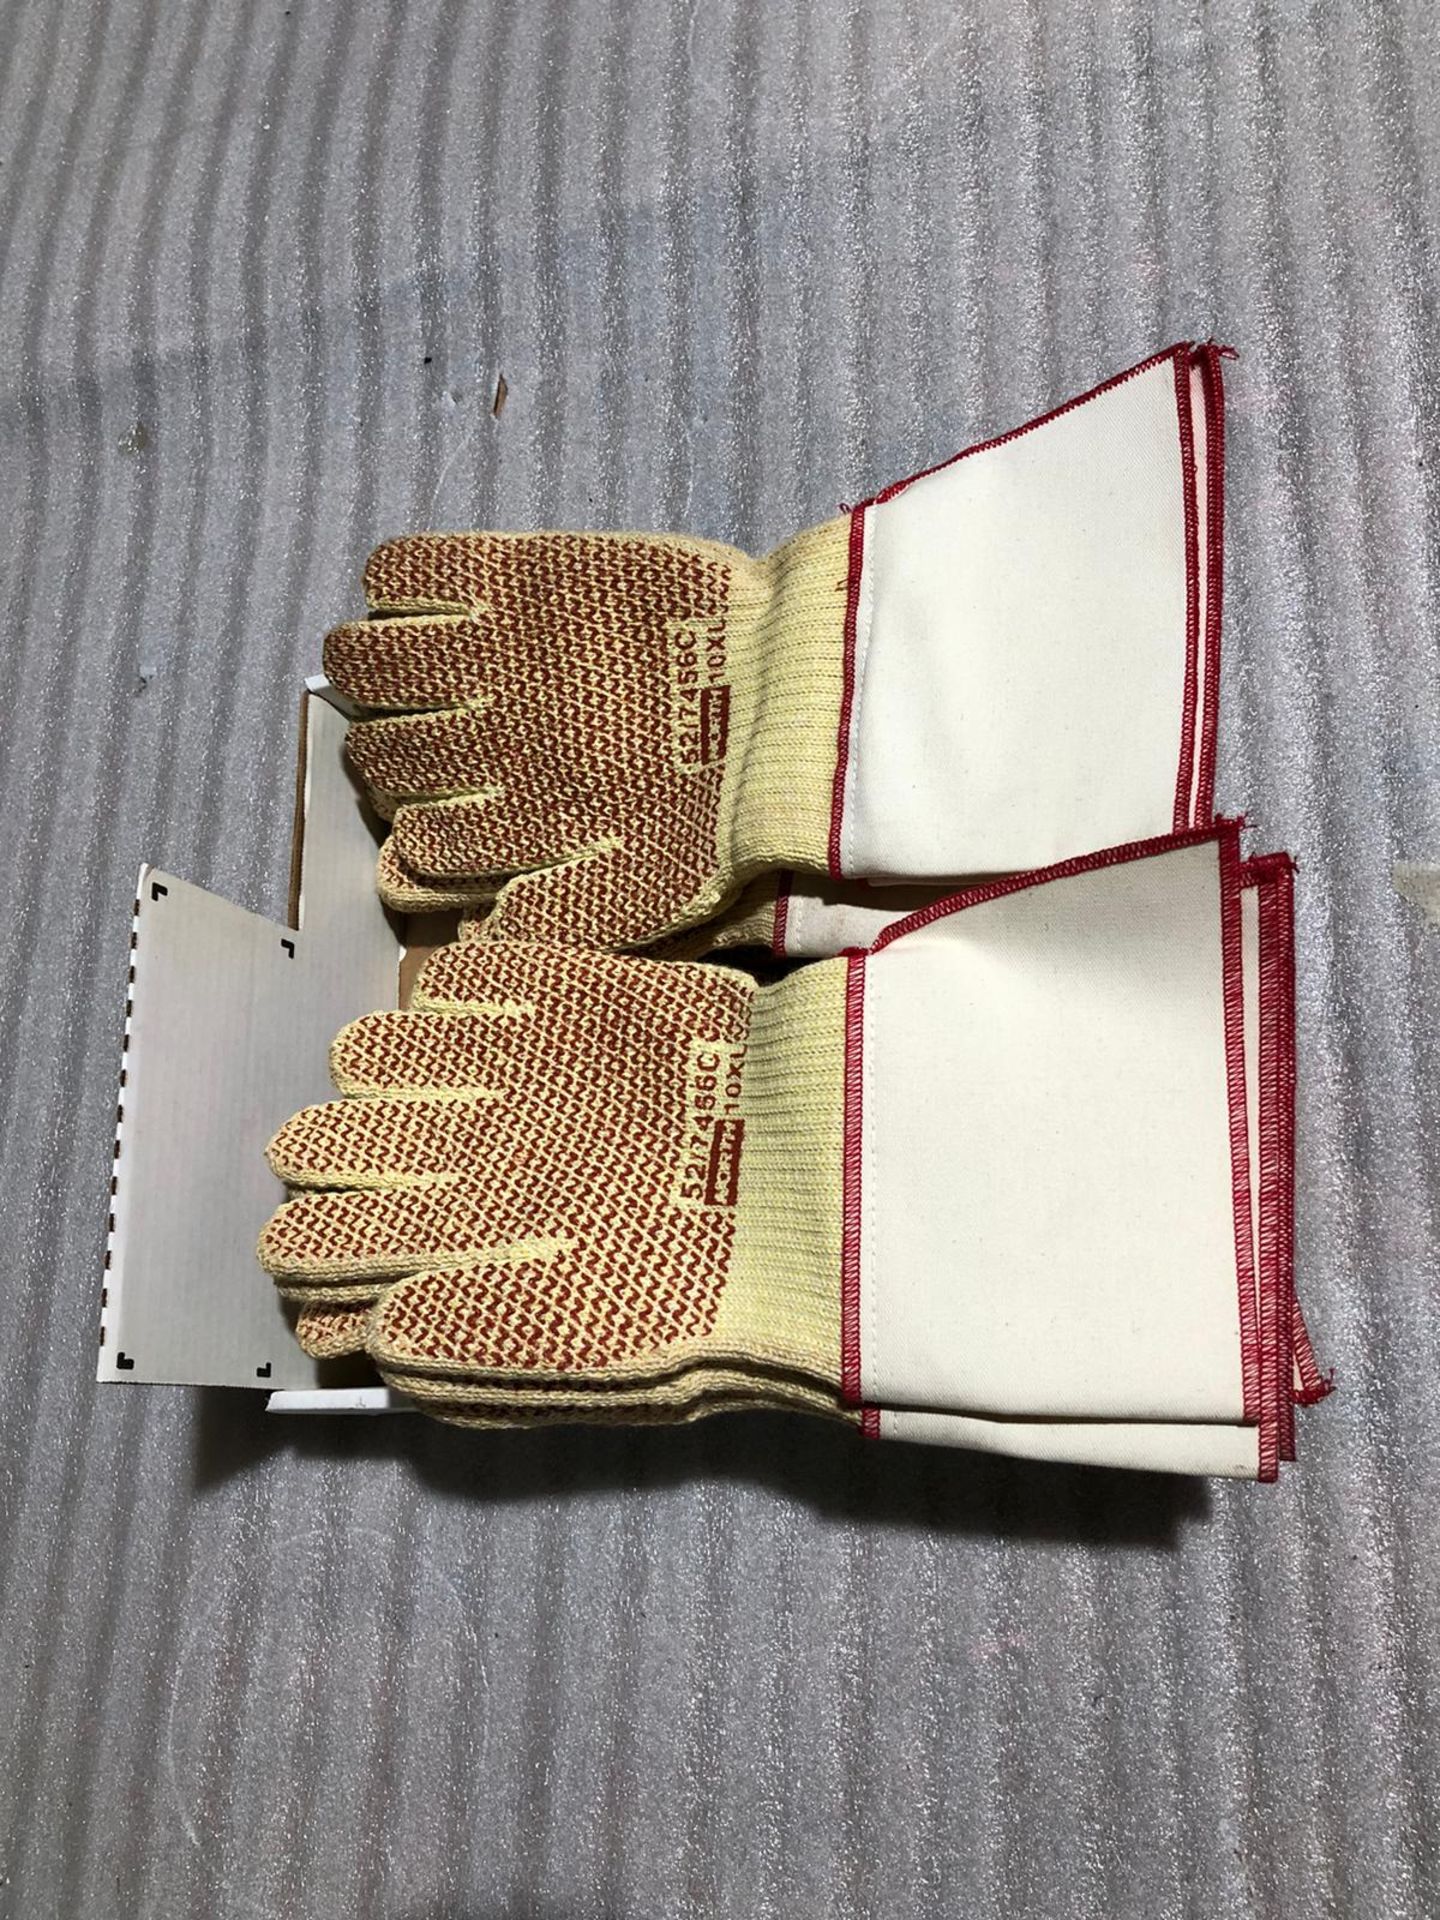 Lot of 7 Honeywell Work Gloves 10 XL - Image 2 of 3